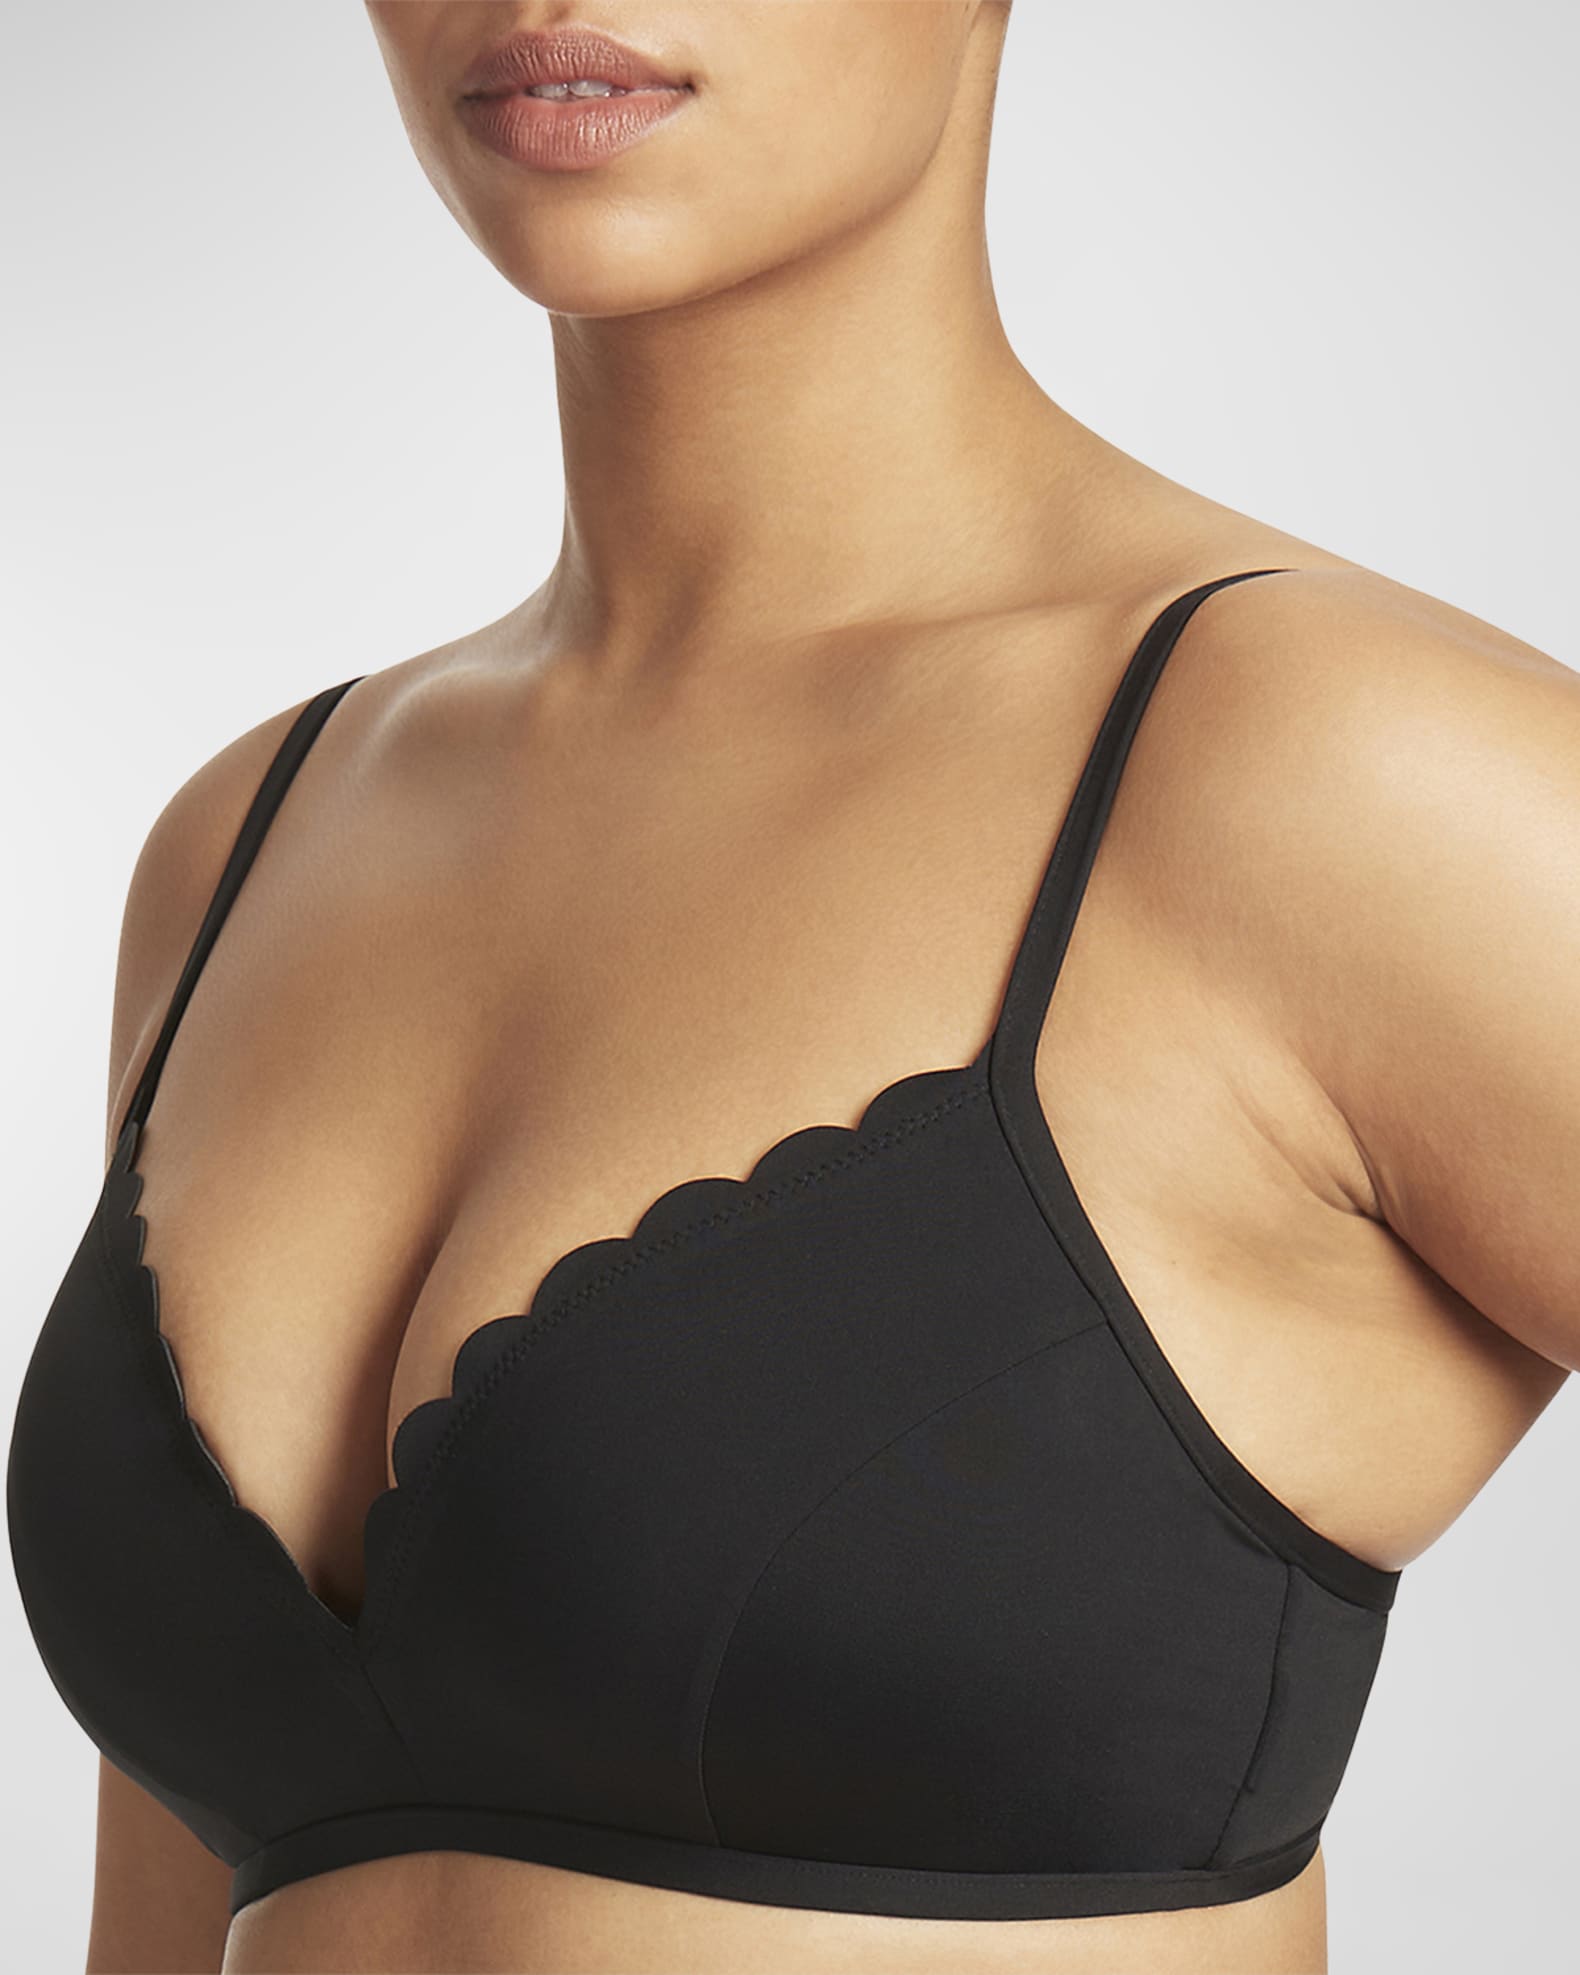 DD+ Swimwear for Bigger Busts  Underwire & Cupped Swimsuits